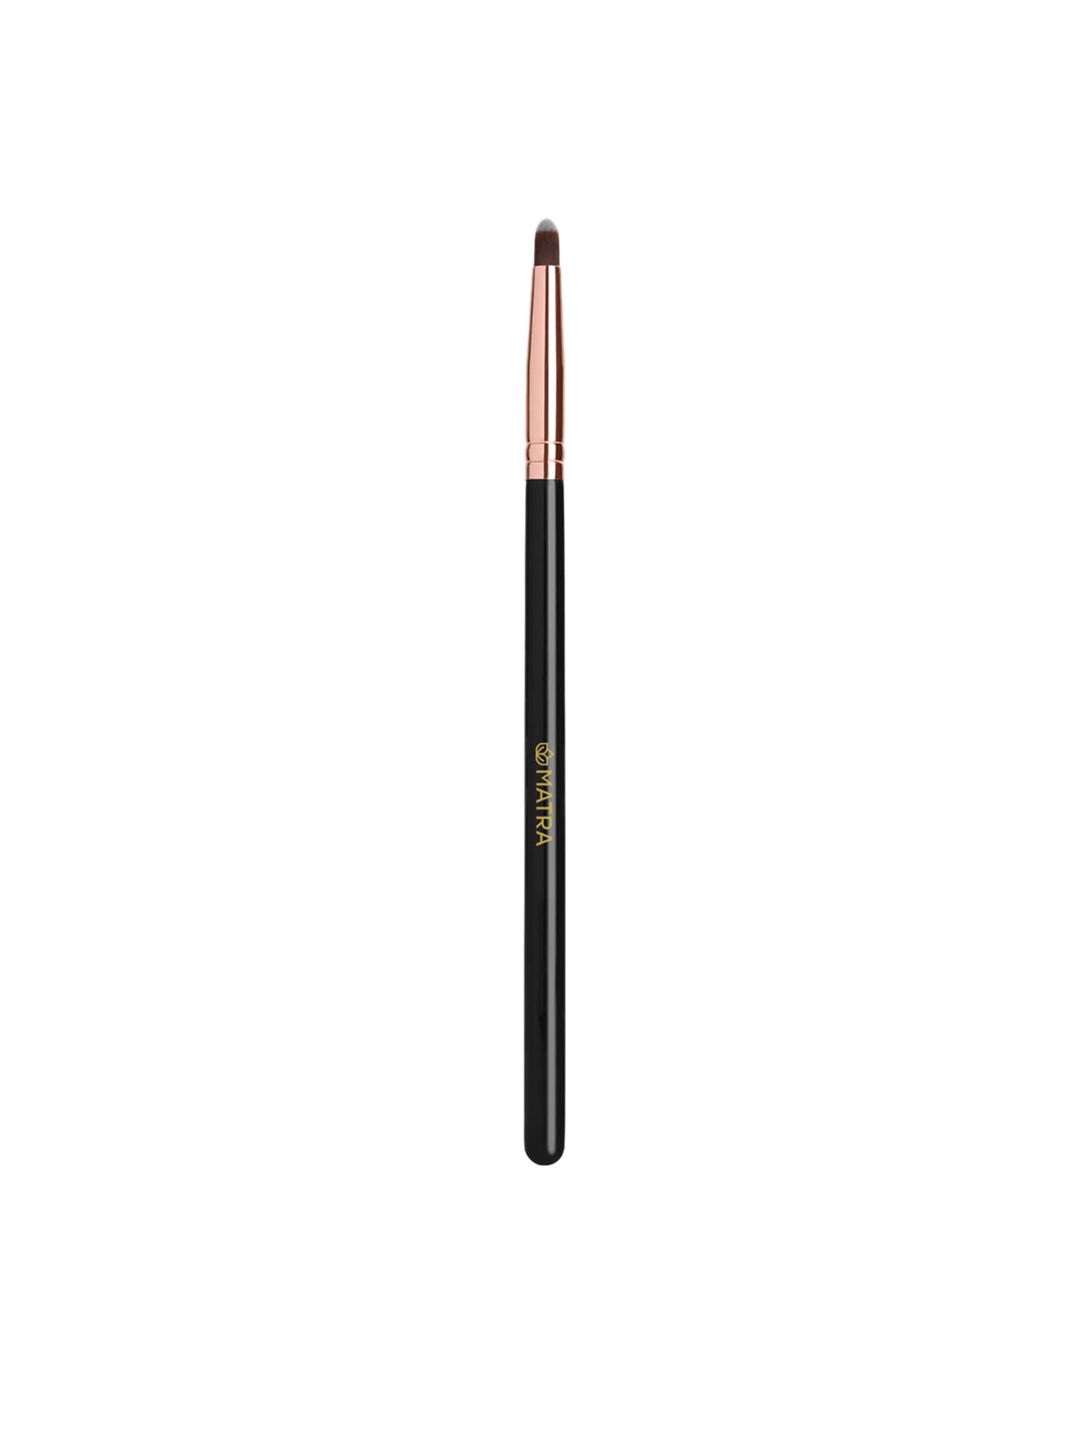 MATRA Professional Pencil Makeup Brush for Lips & Eyes 176 - Black Price in India